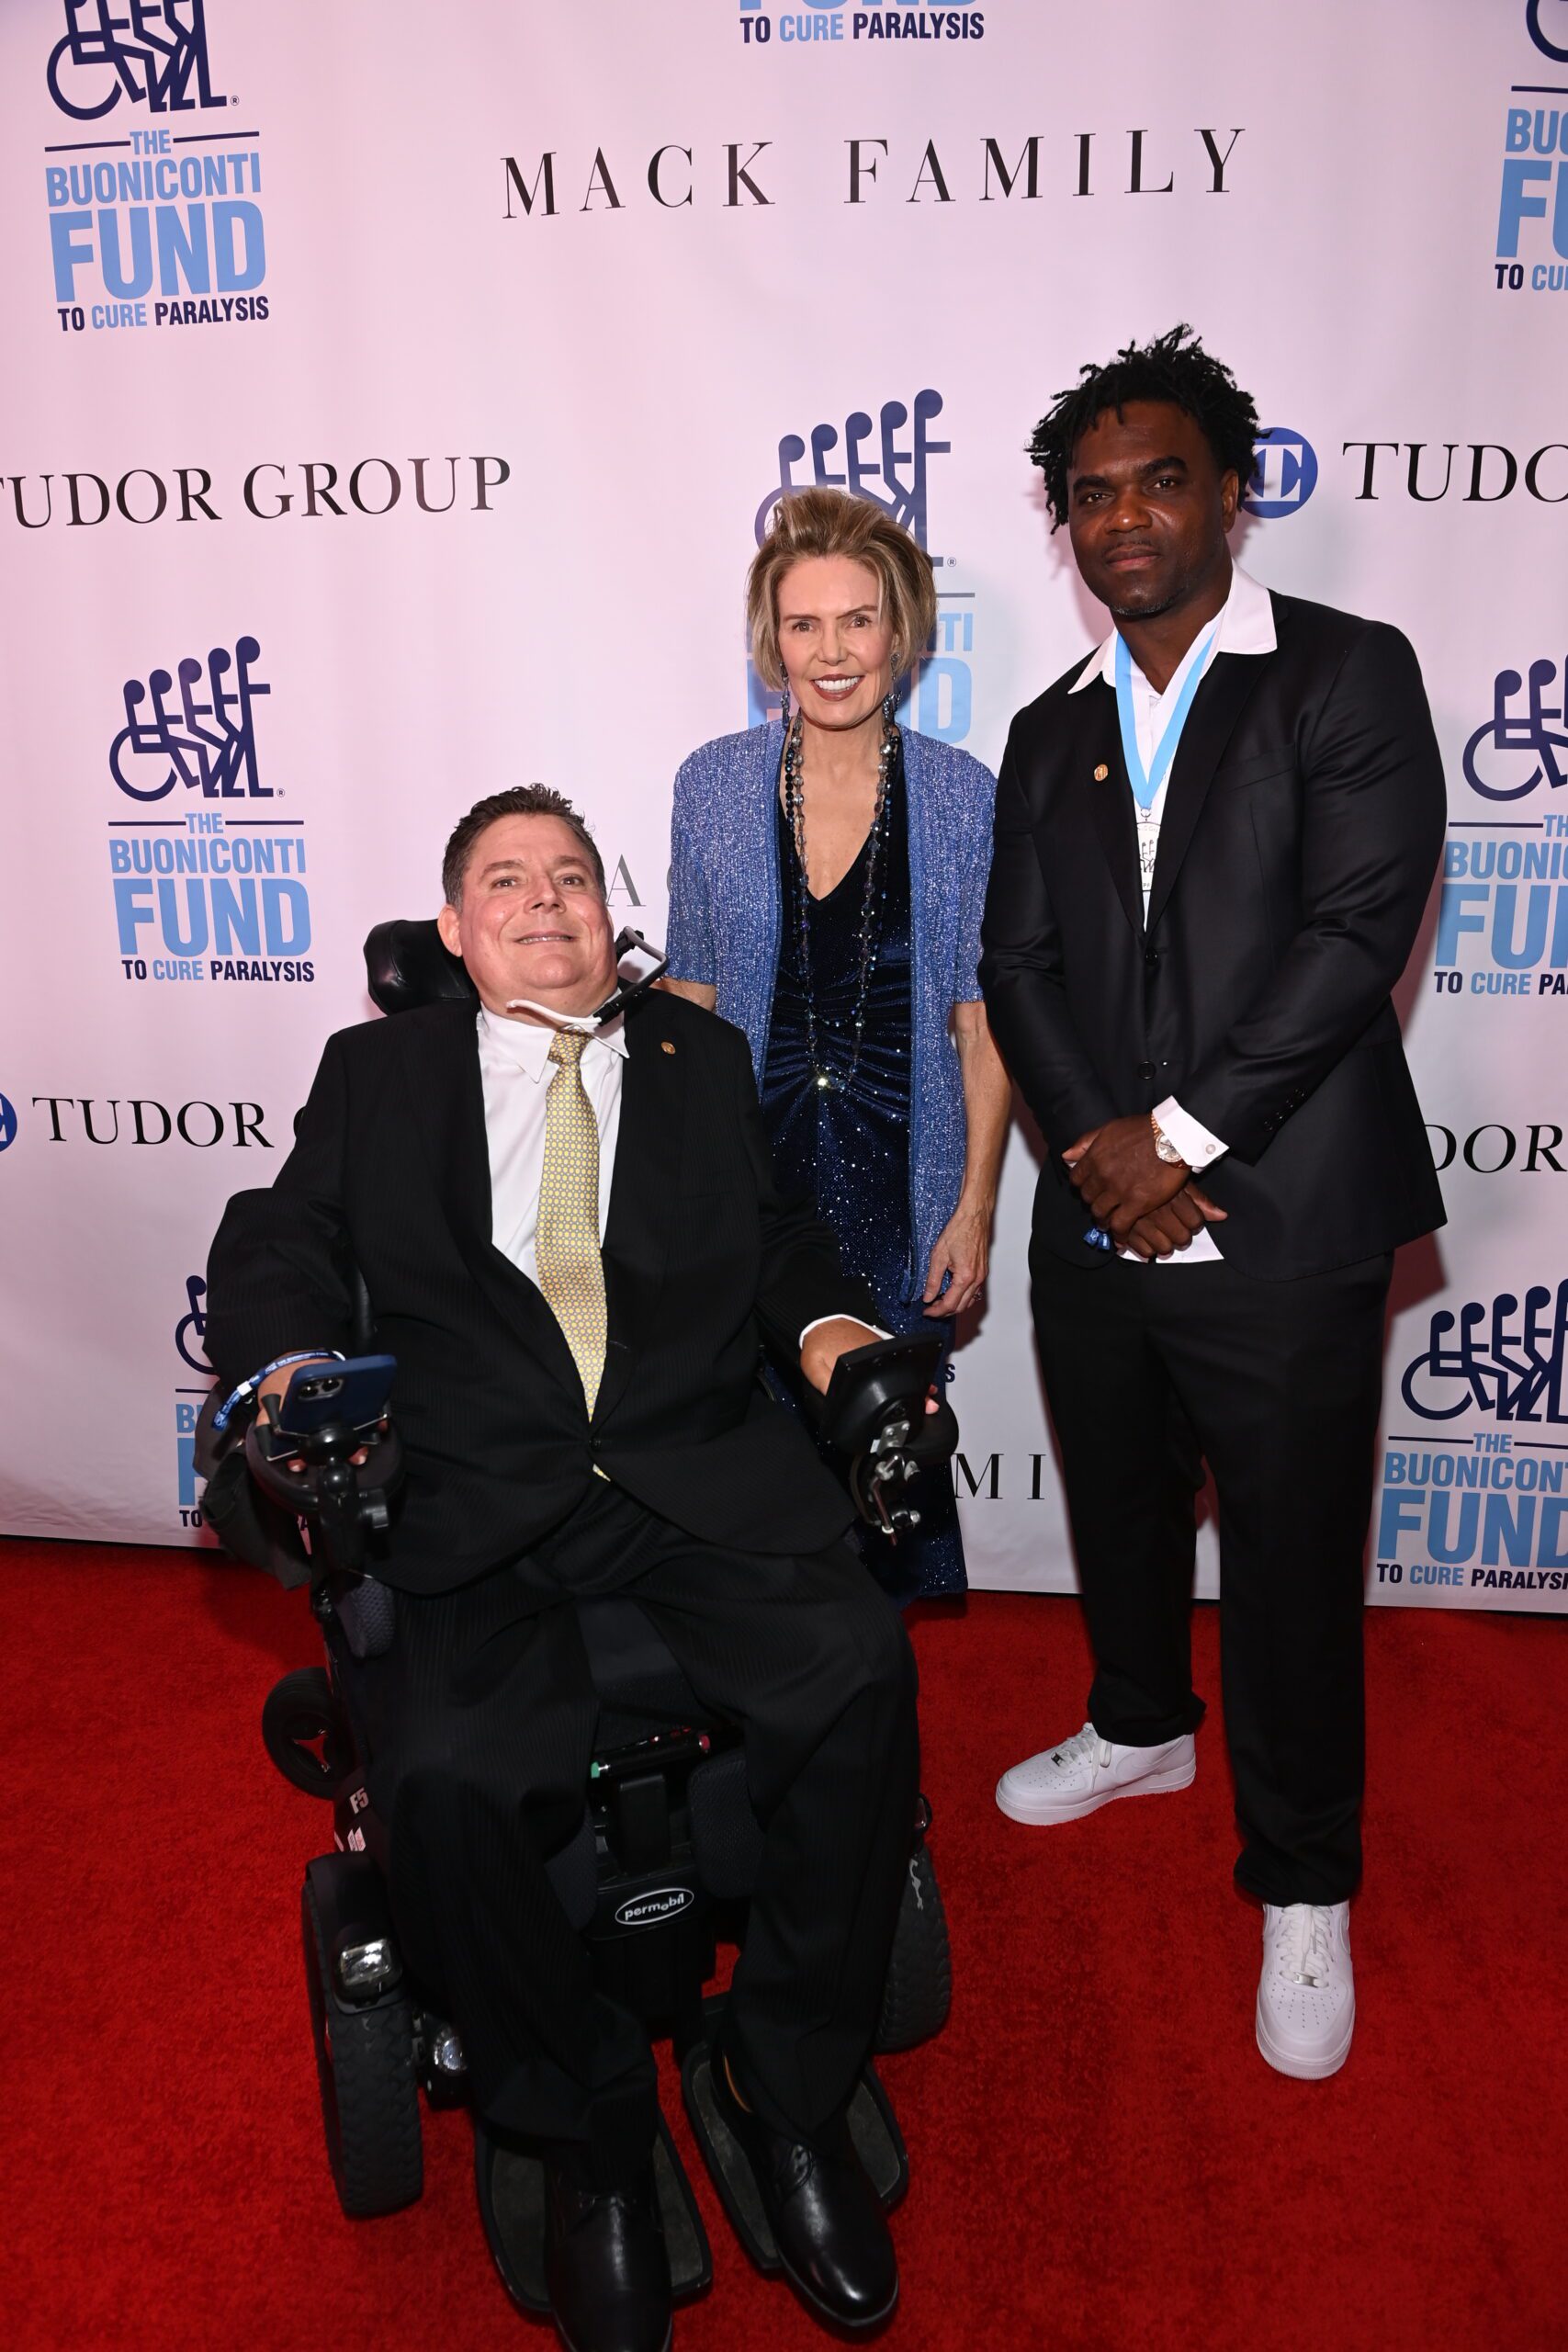 Marc Buoniconti with Lesley Visser and Edgerrin James